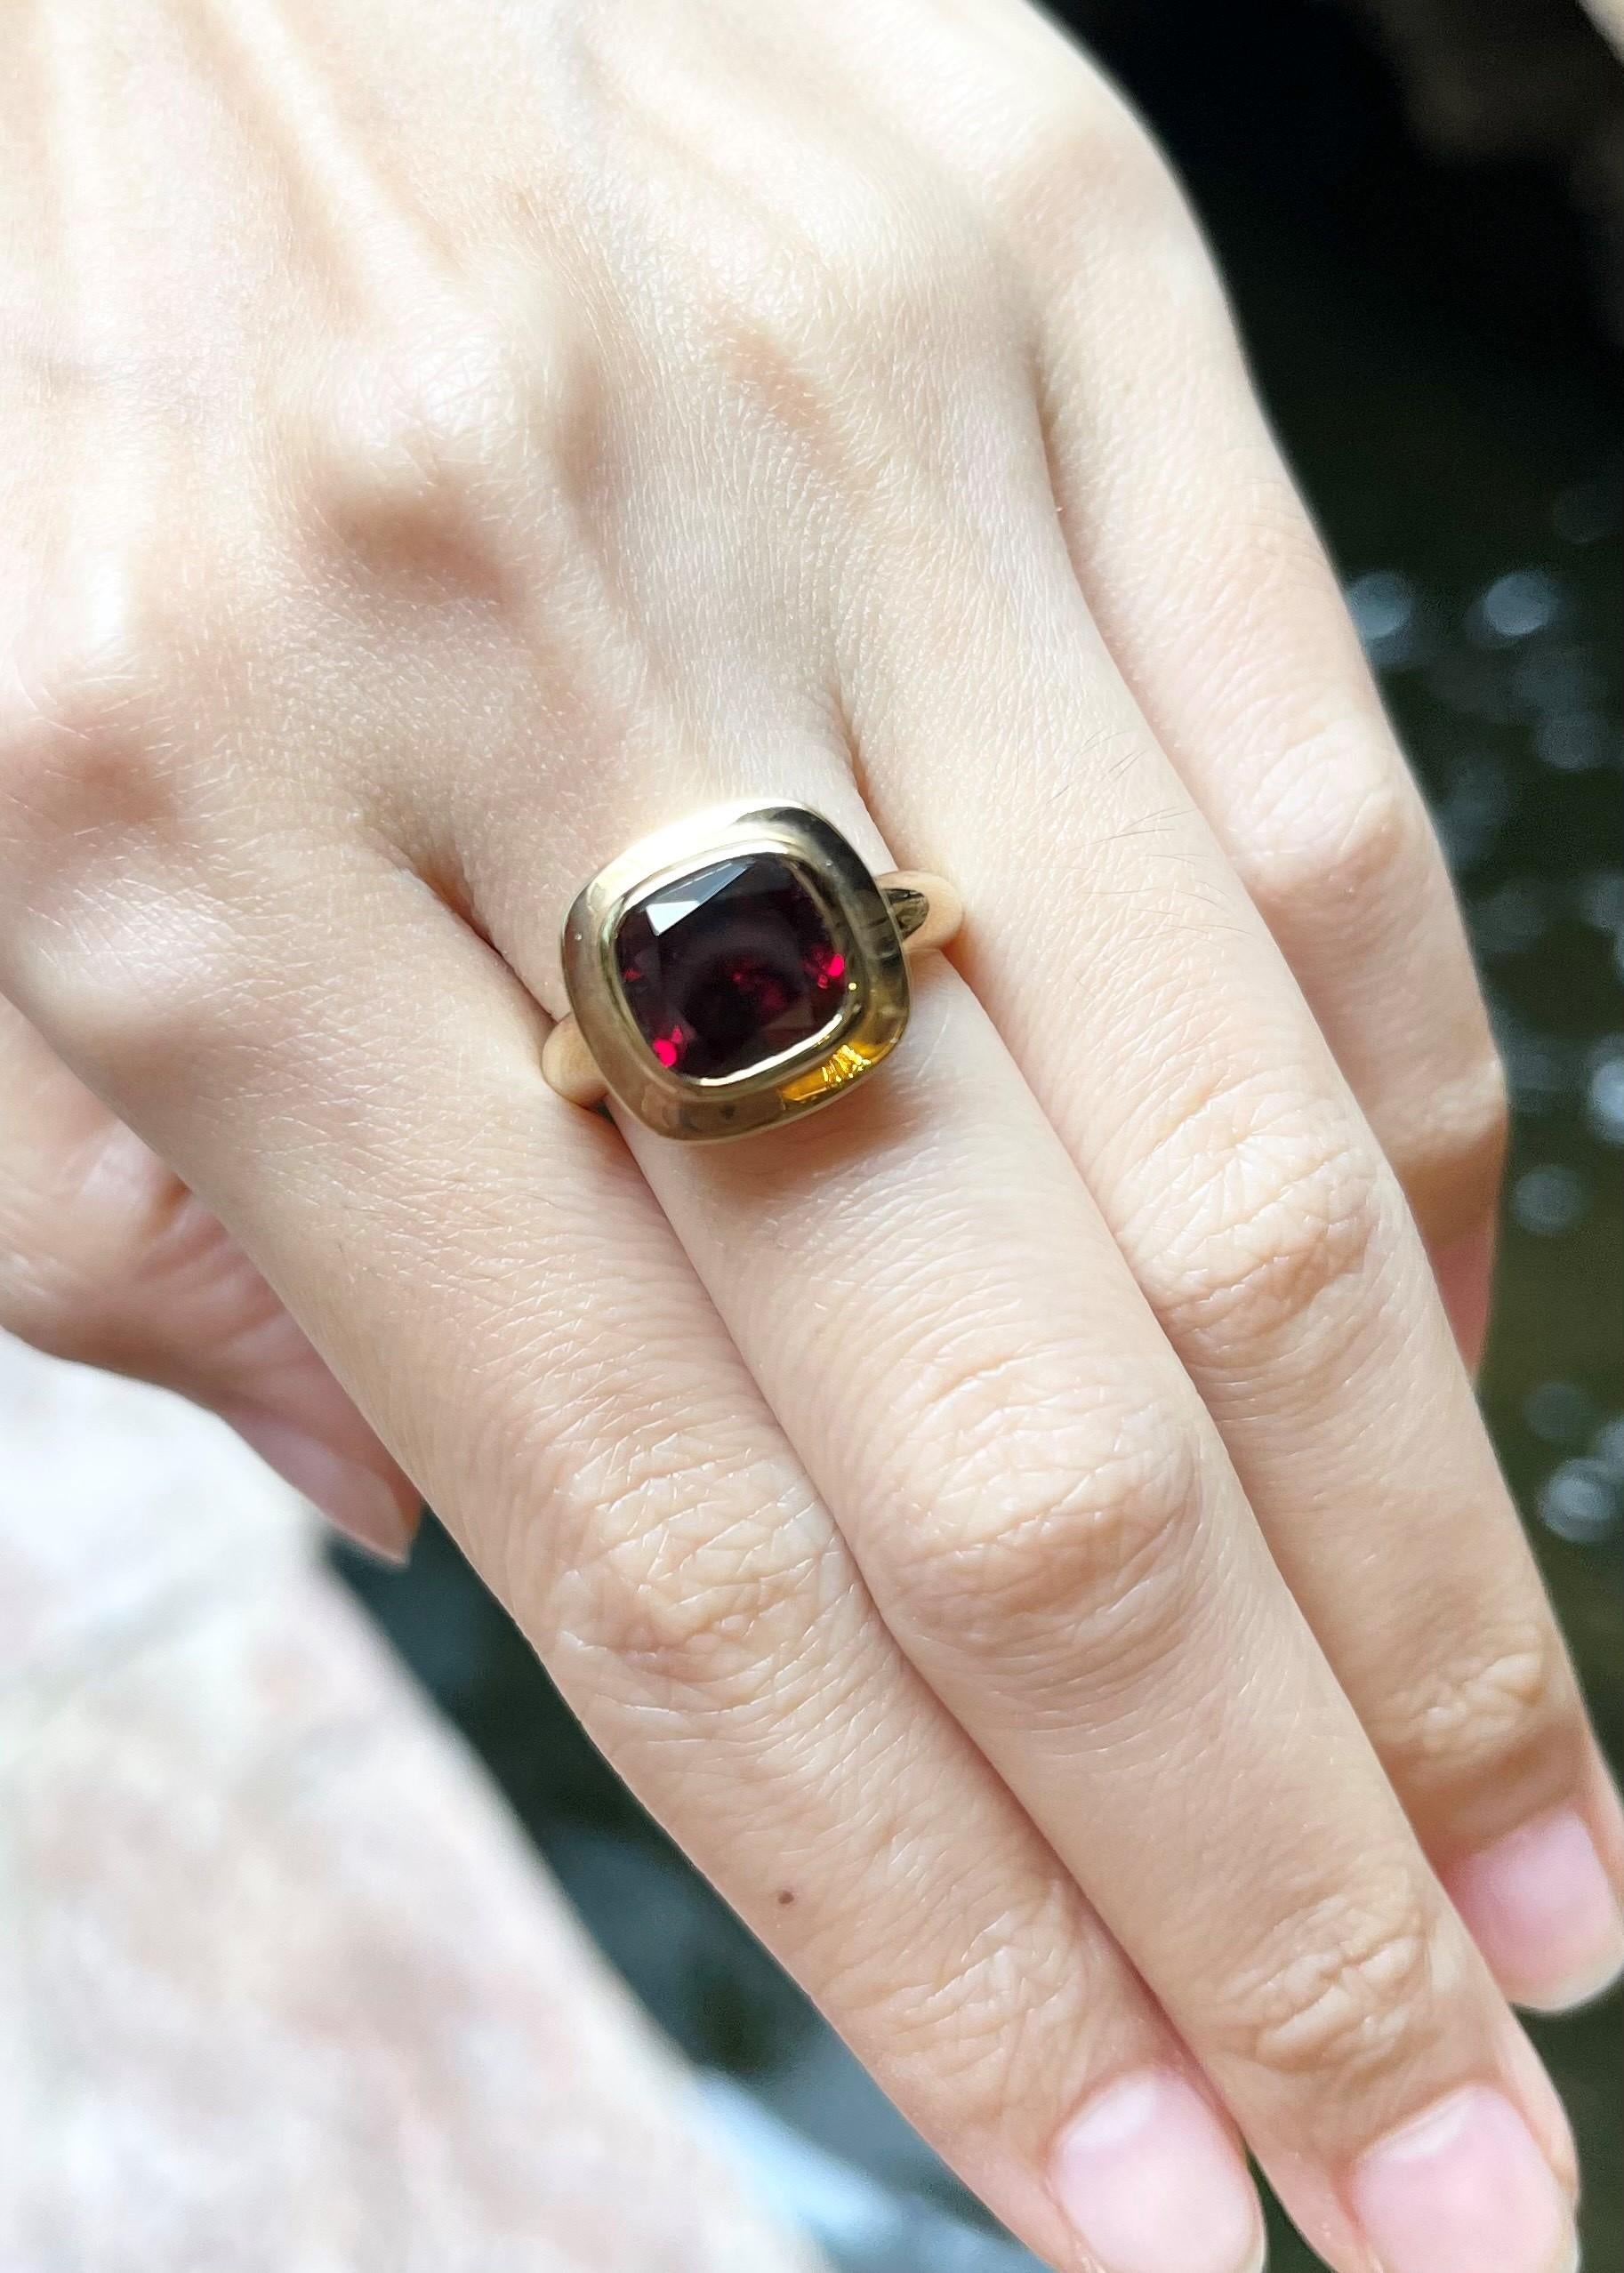 Garnet 3.45 carats Ring set in 14K Gold Settings

Width:  1.3 cm 
Length: 1.3 cm
Ring Size: 51
Total Weight: 6.08 grams

